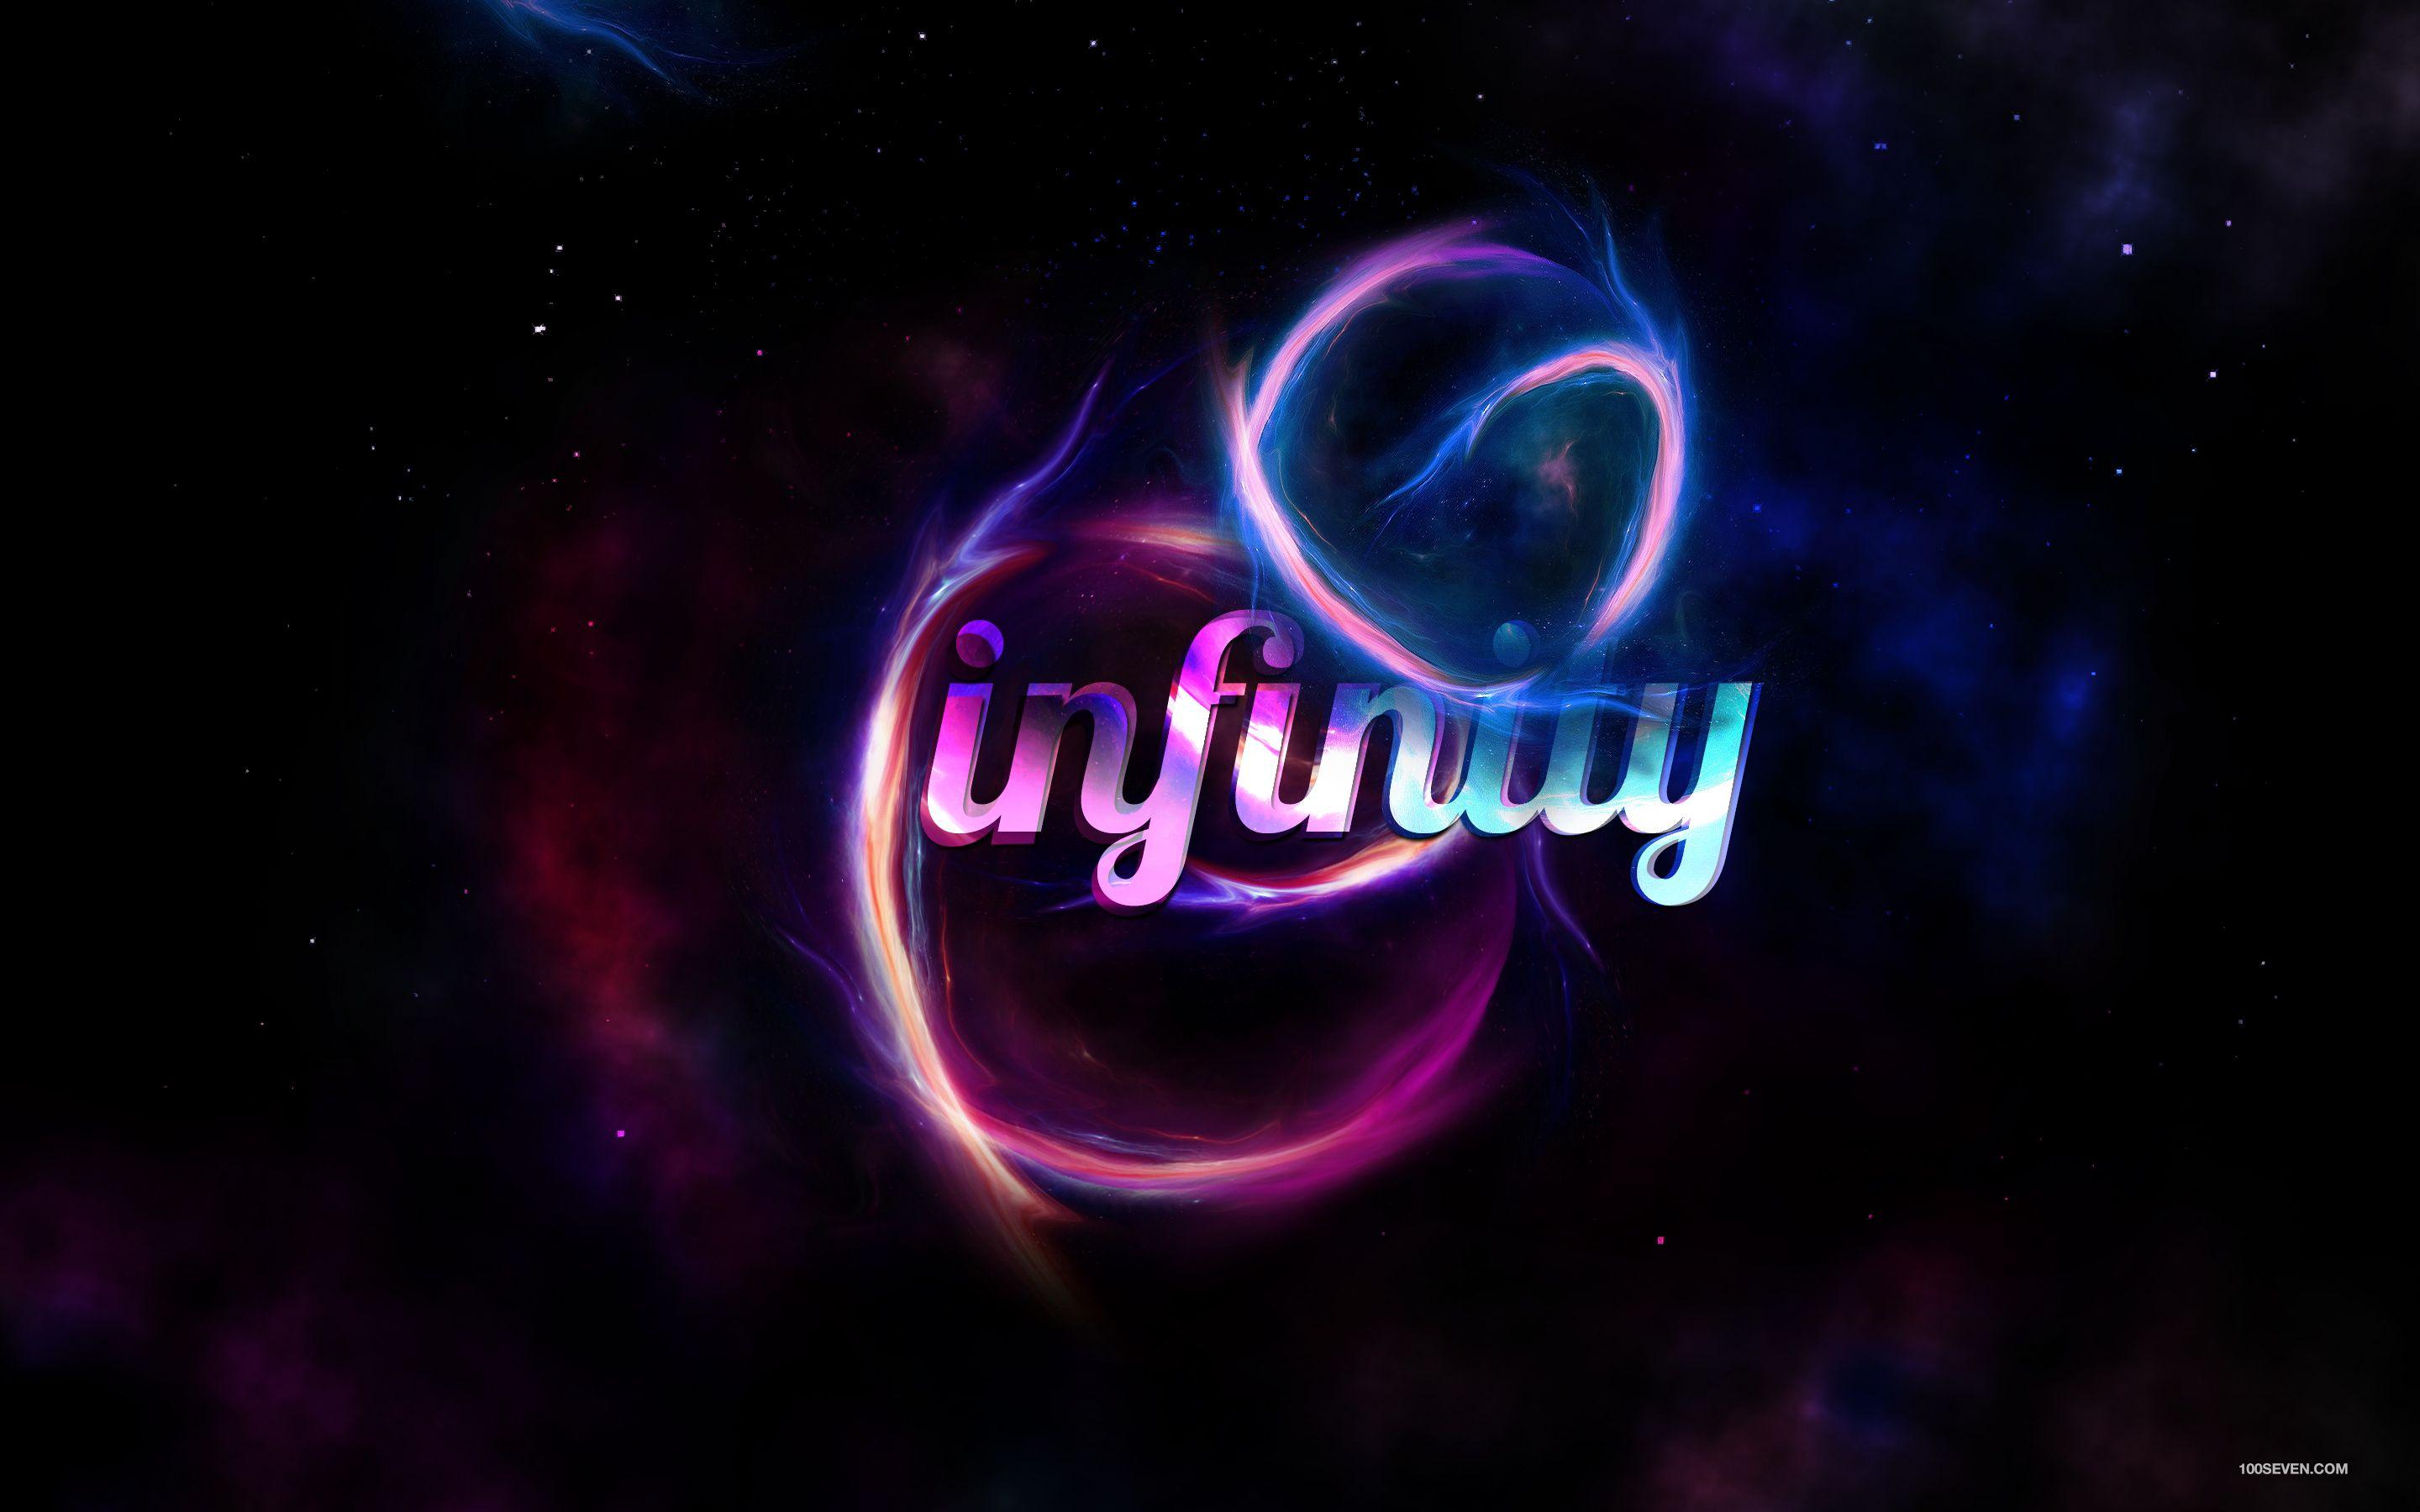 Galaxy Infinity Wallpapers - Top Free